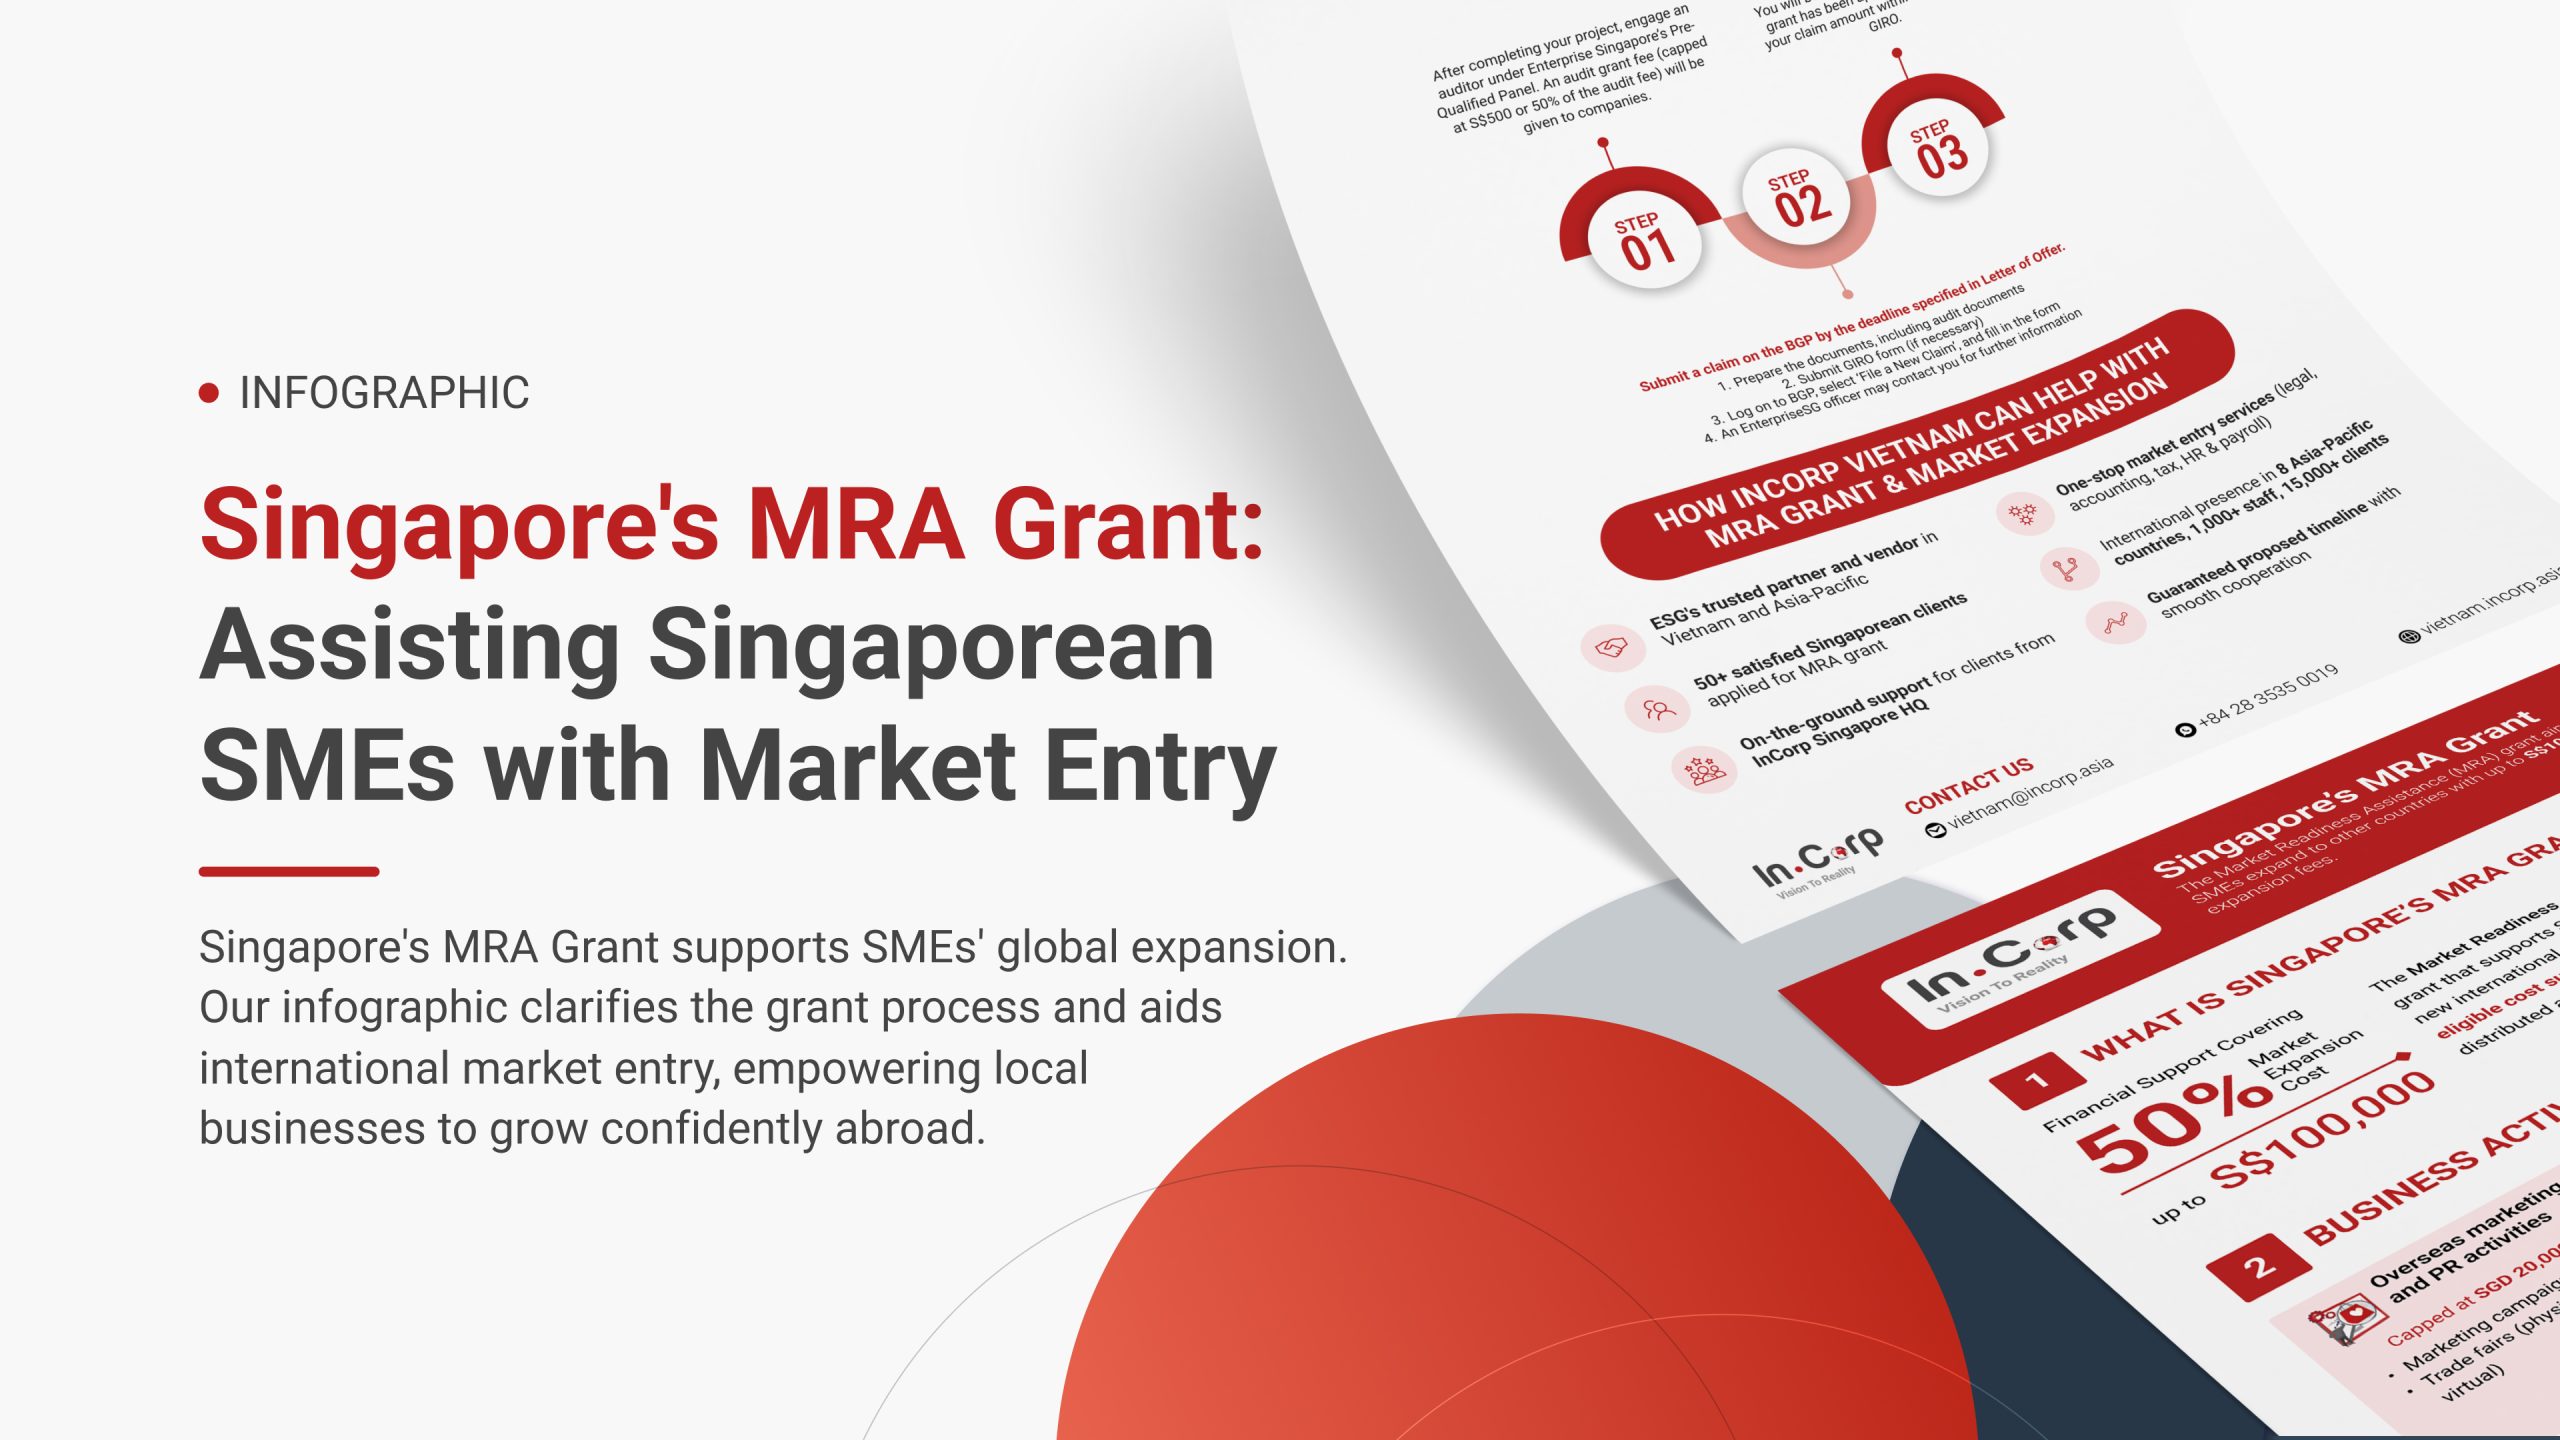 Singapore’s MRA Grant – Market Entry Support for Singaporean SMEs